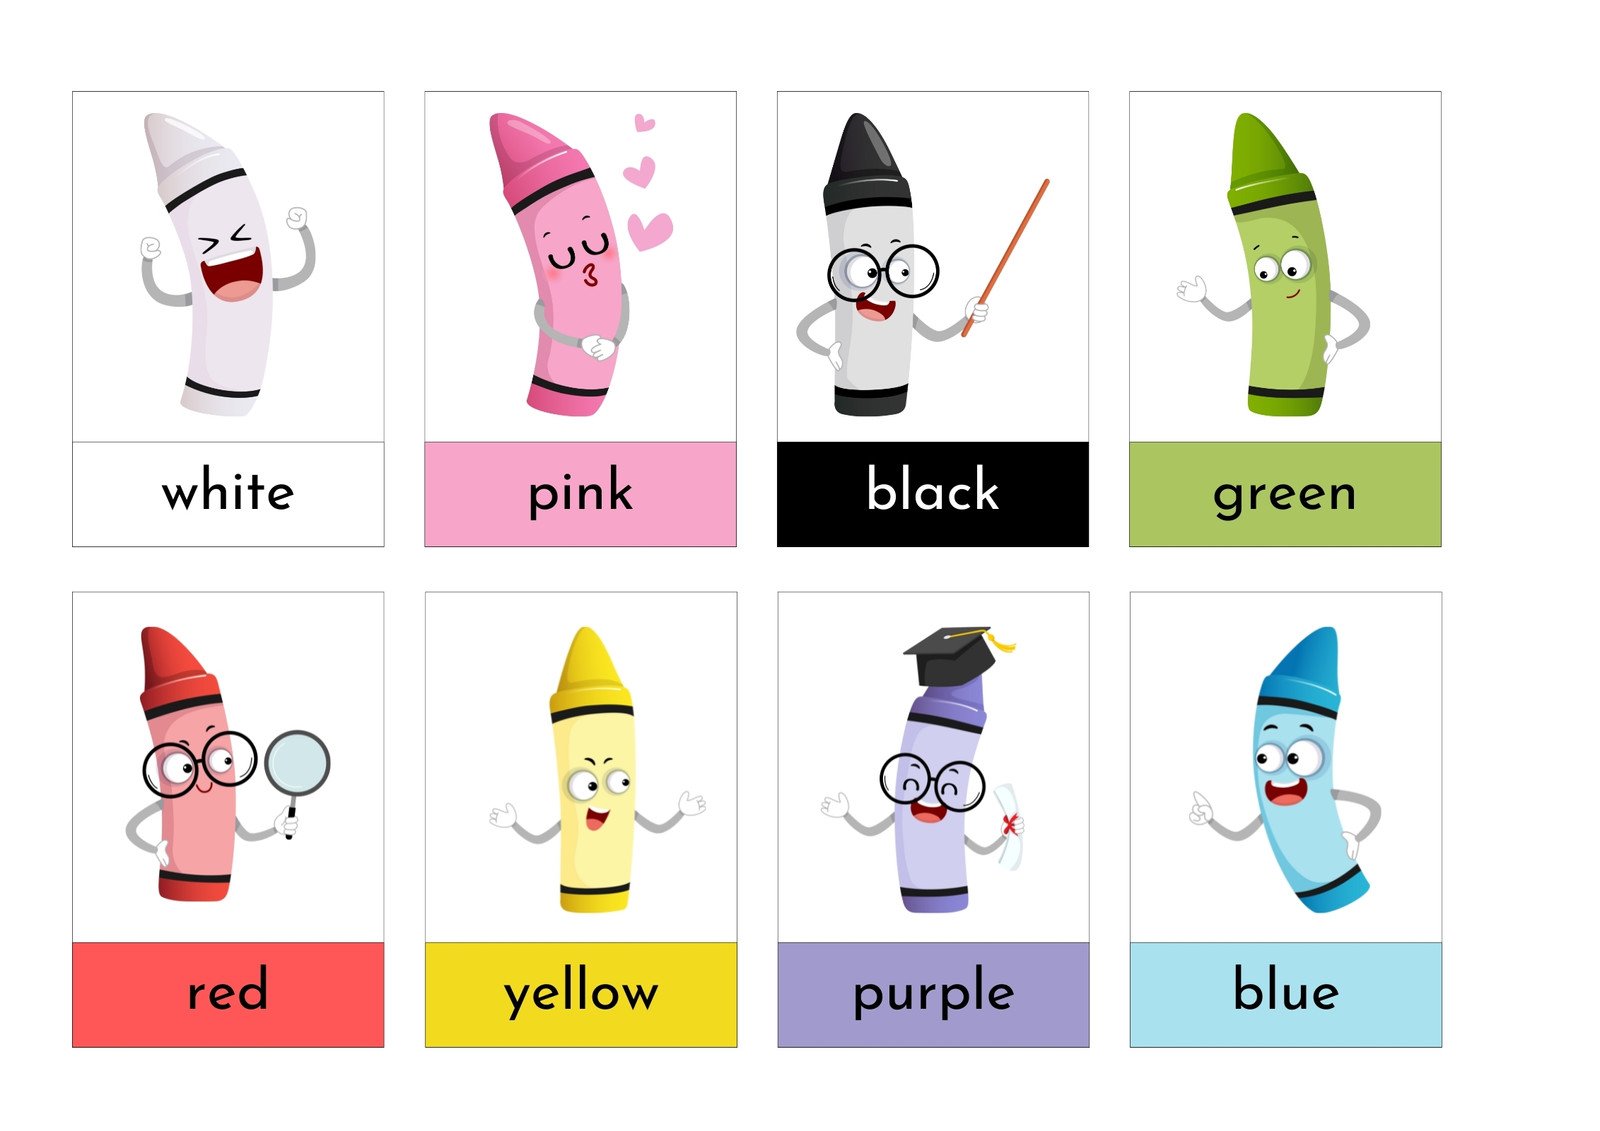 Free color flashcard templates to edit and print